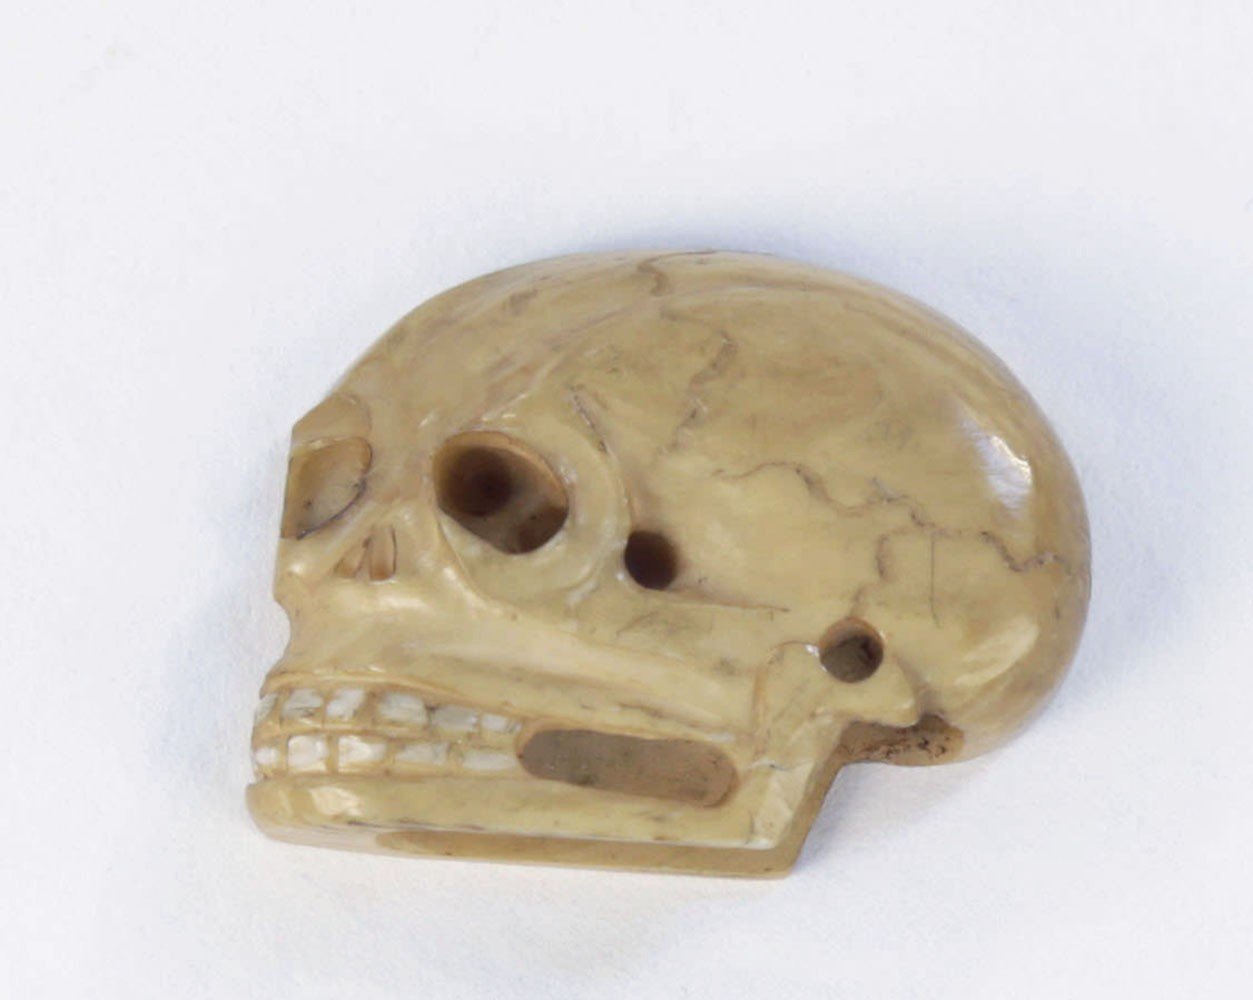 A Japanese Bone or Ivory Button or Netsuke by 19th Century Japanese School